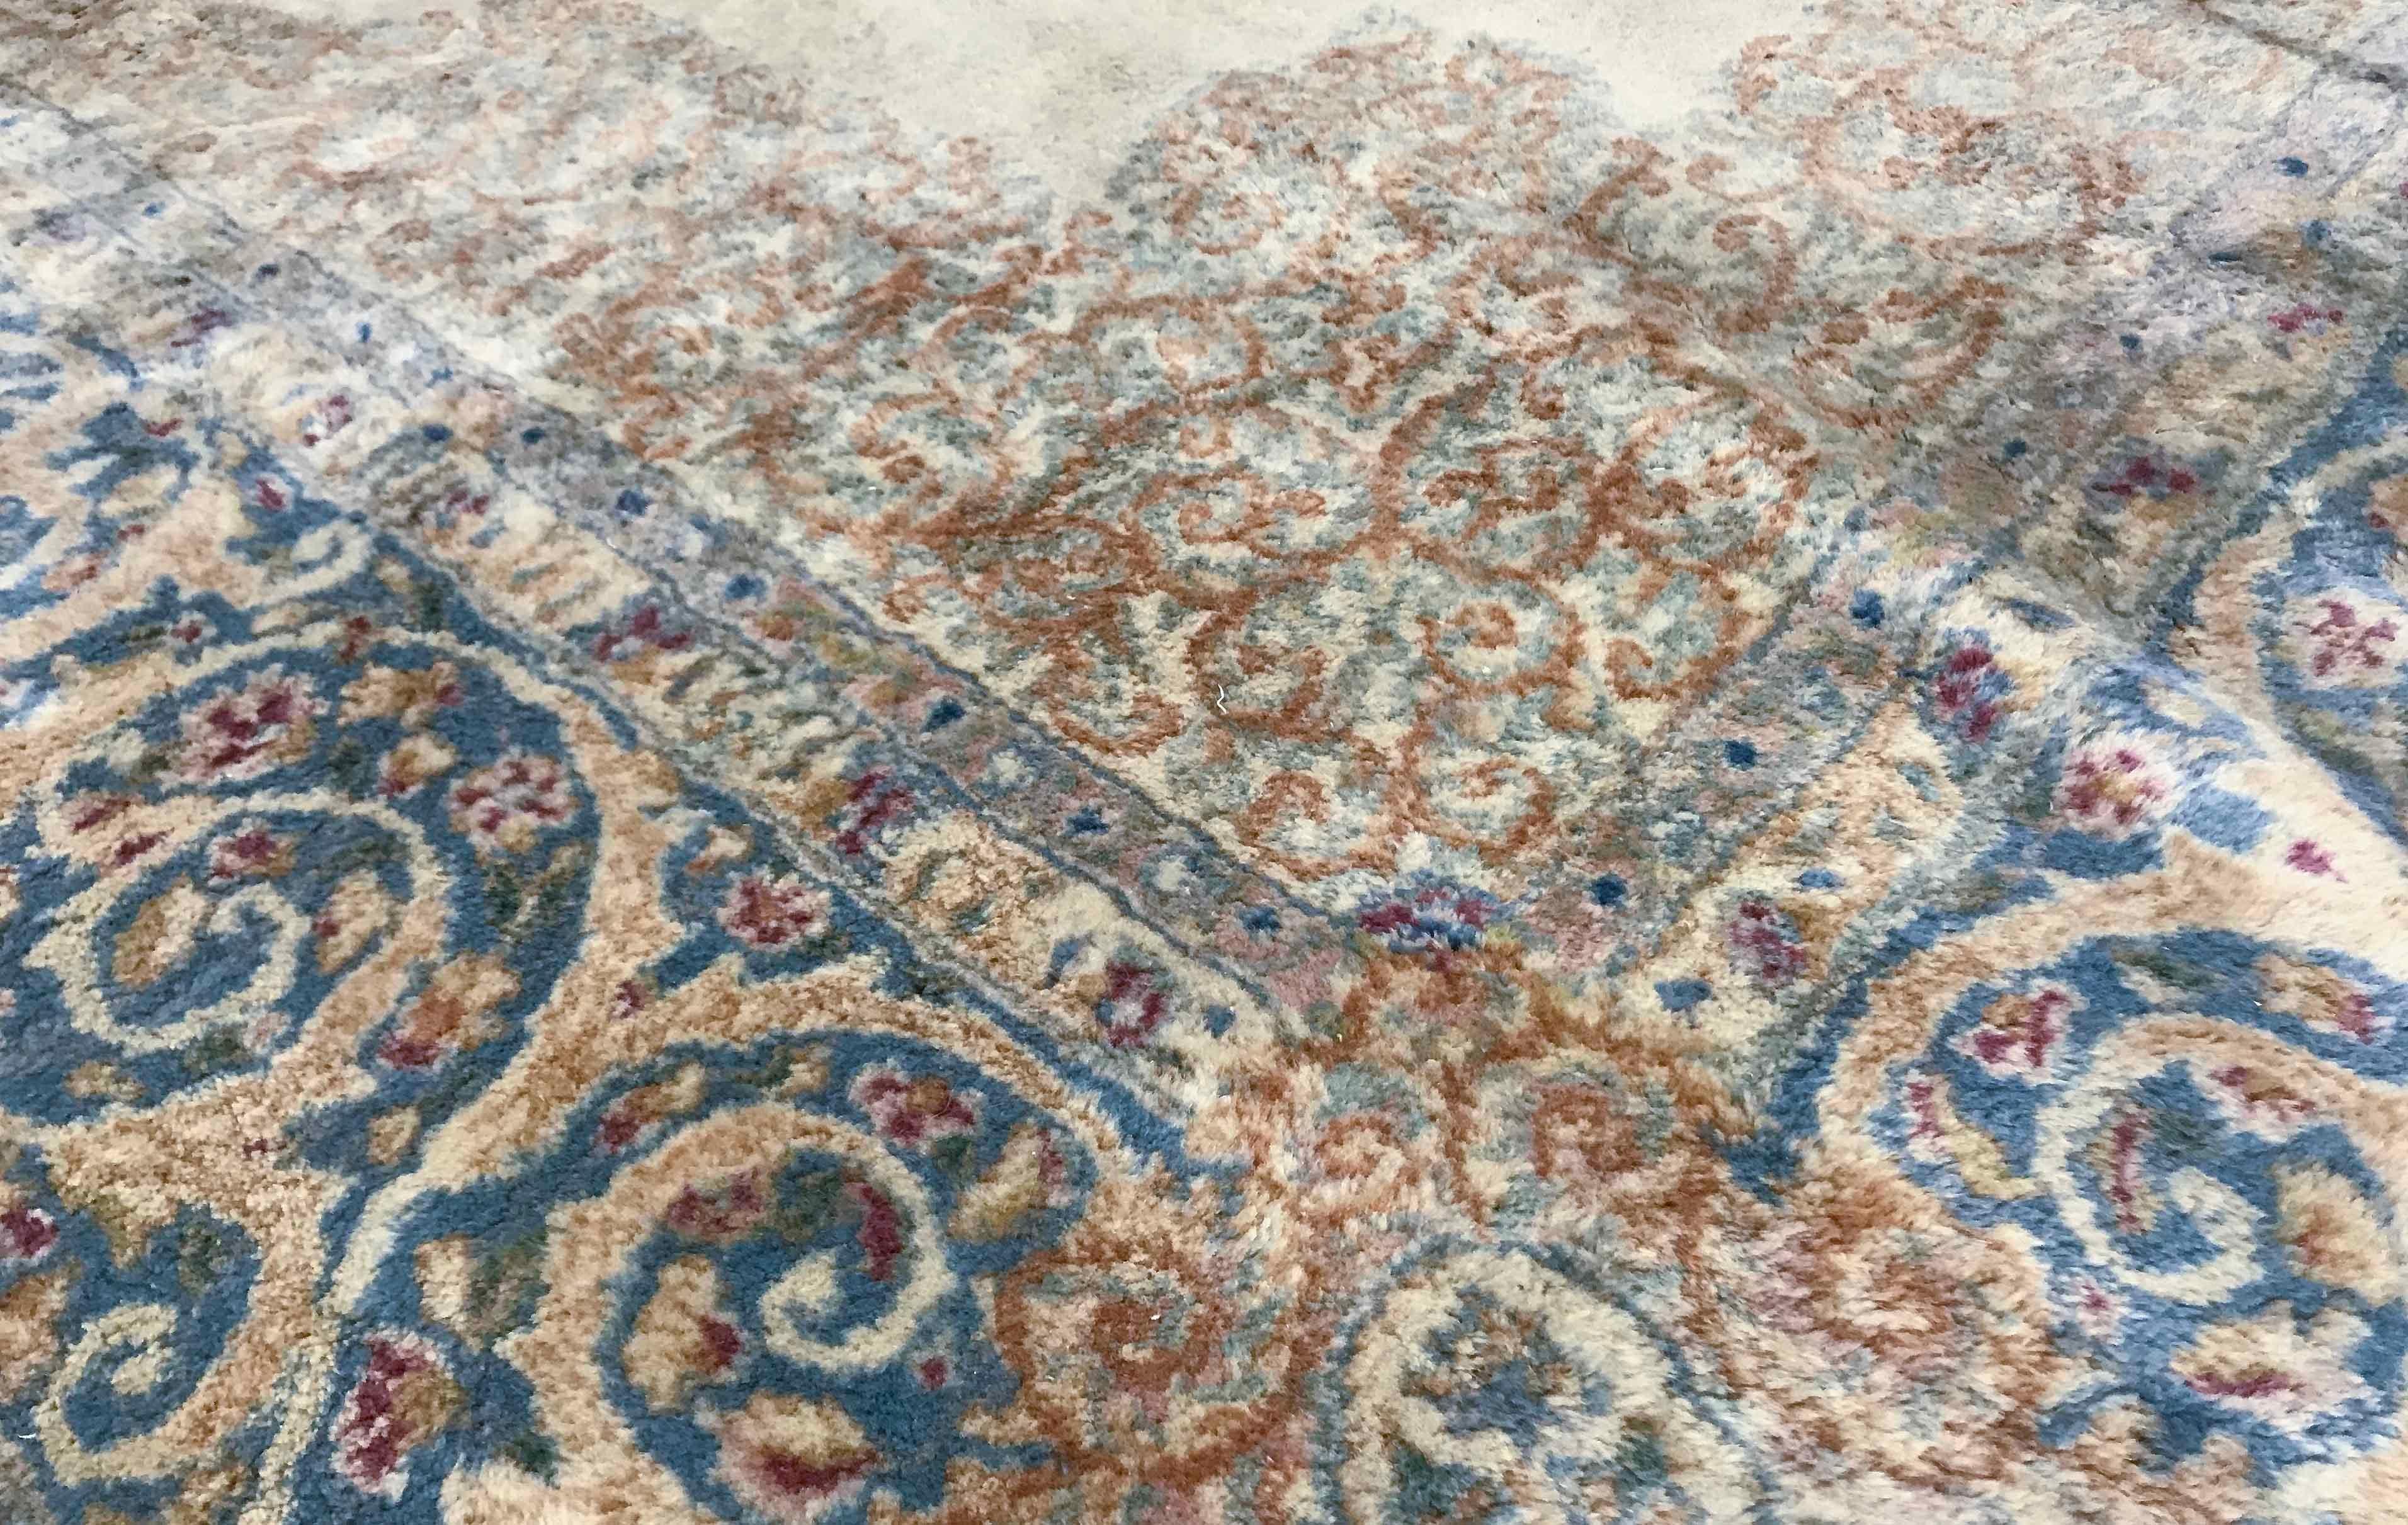 Vintage Persian Kerman rug, circa 1940. A Classic look to this Kerman rug with a soft ivory field with a central floral medallion surrounded by a main border repeating the colors and designs. The softness of this piece will make a tranquil setting